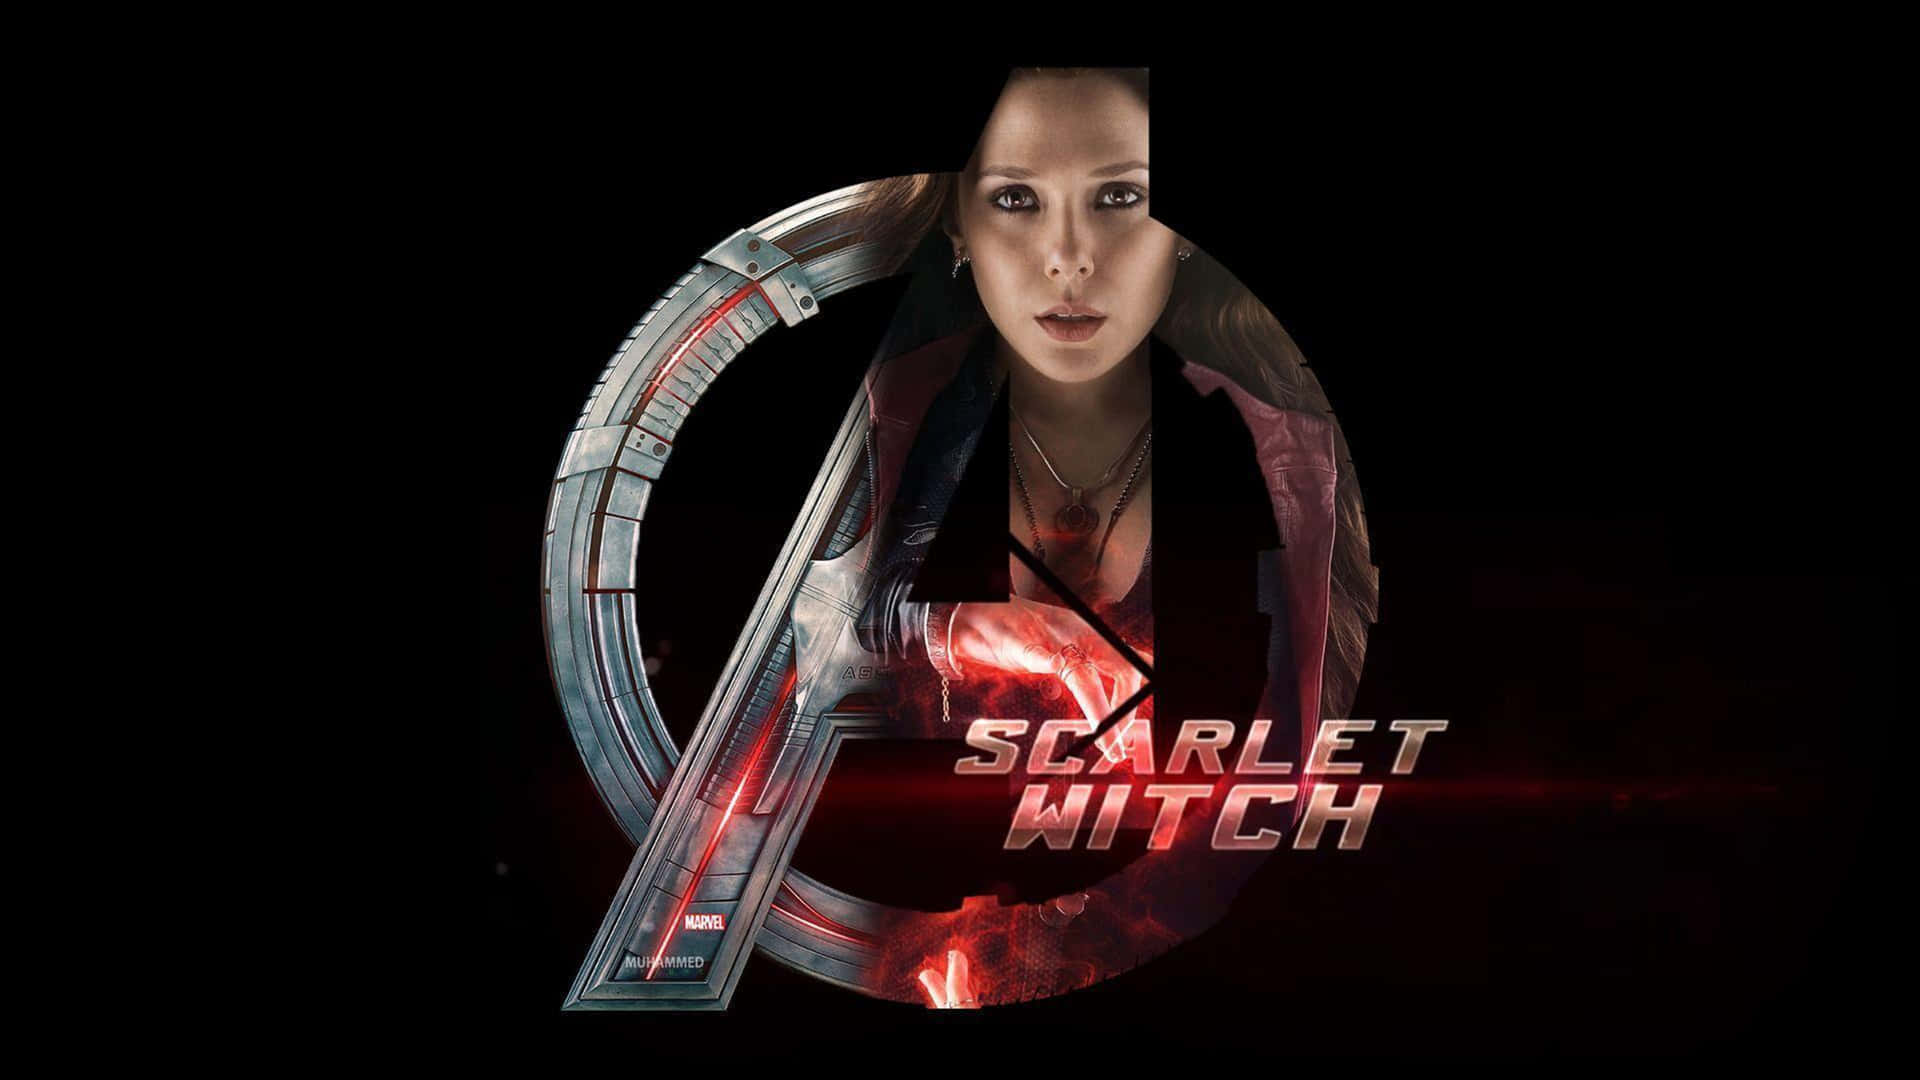 Scarlet Witch Graphic Poster 8k Wallpaper